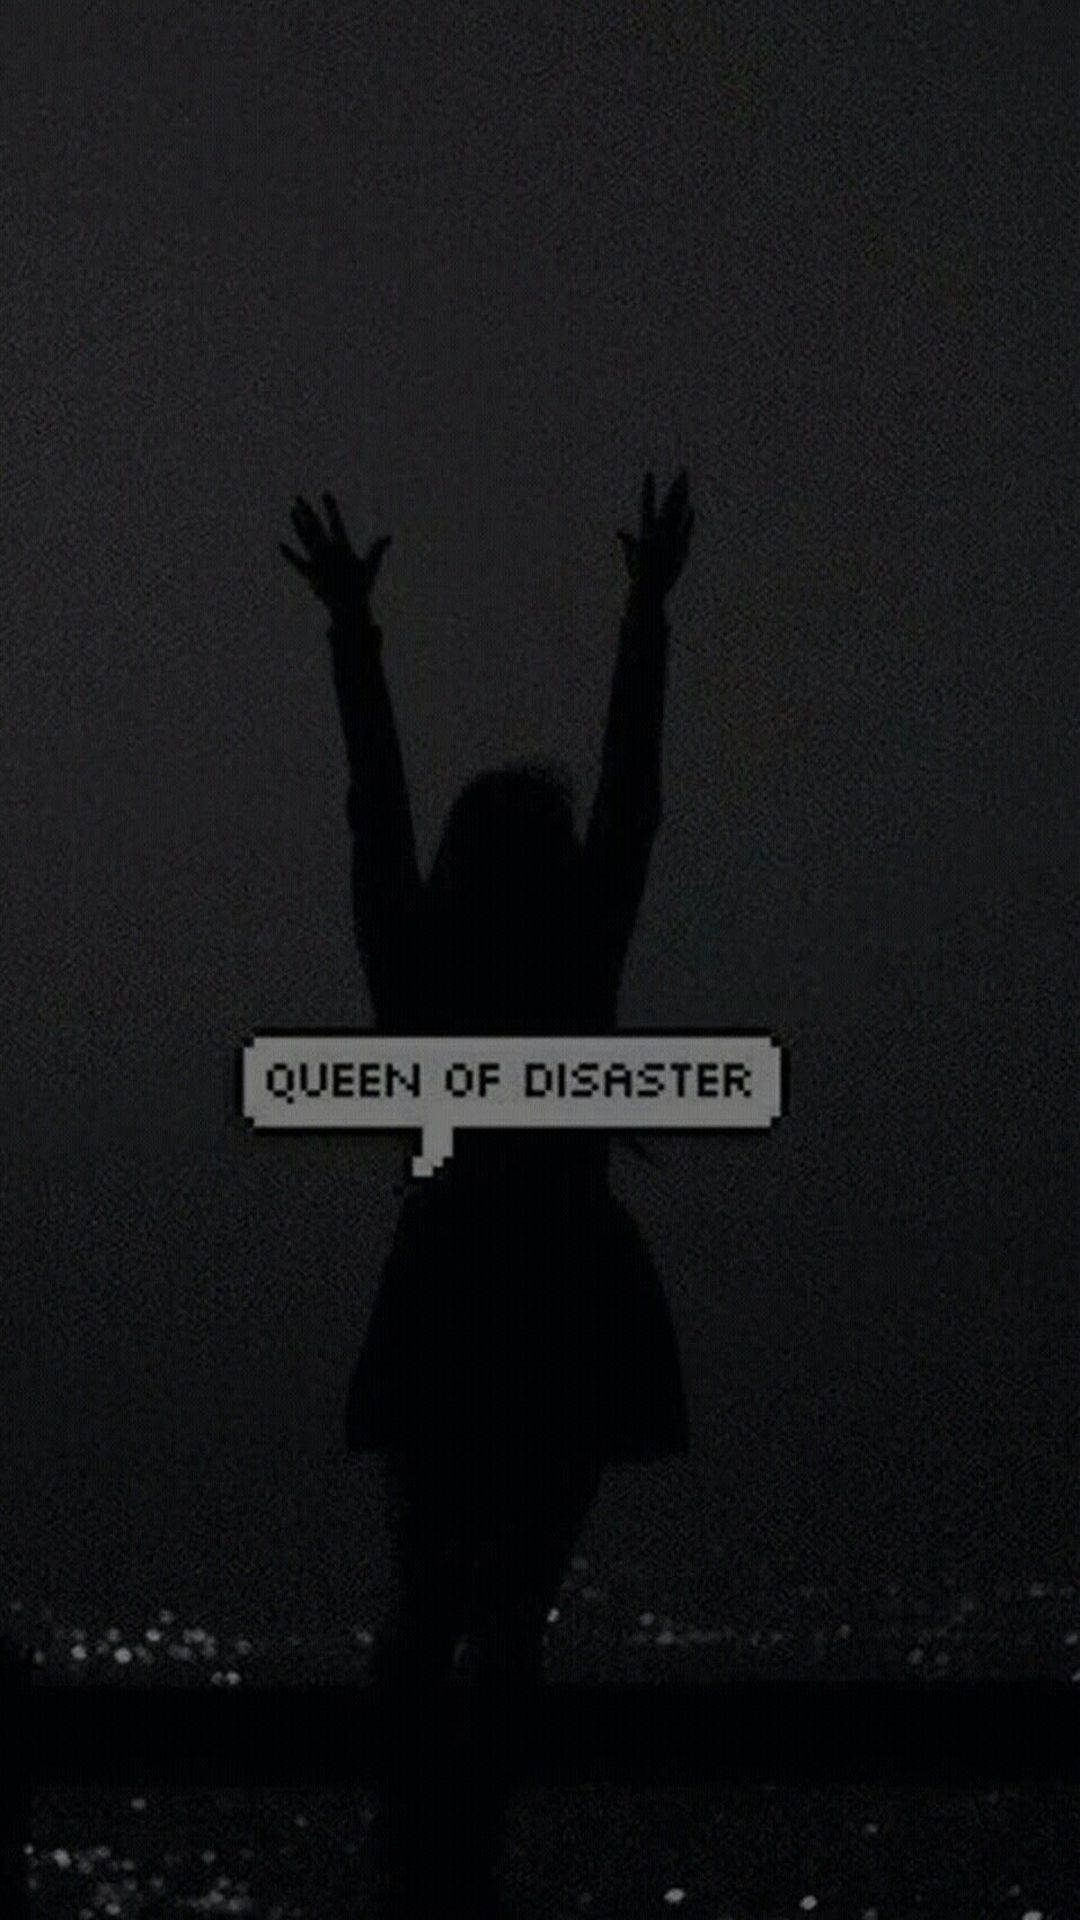 Queen of disaster - Profile picture